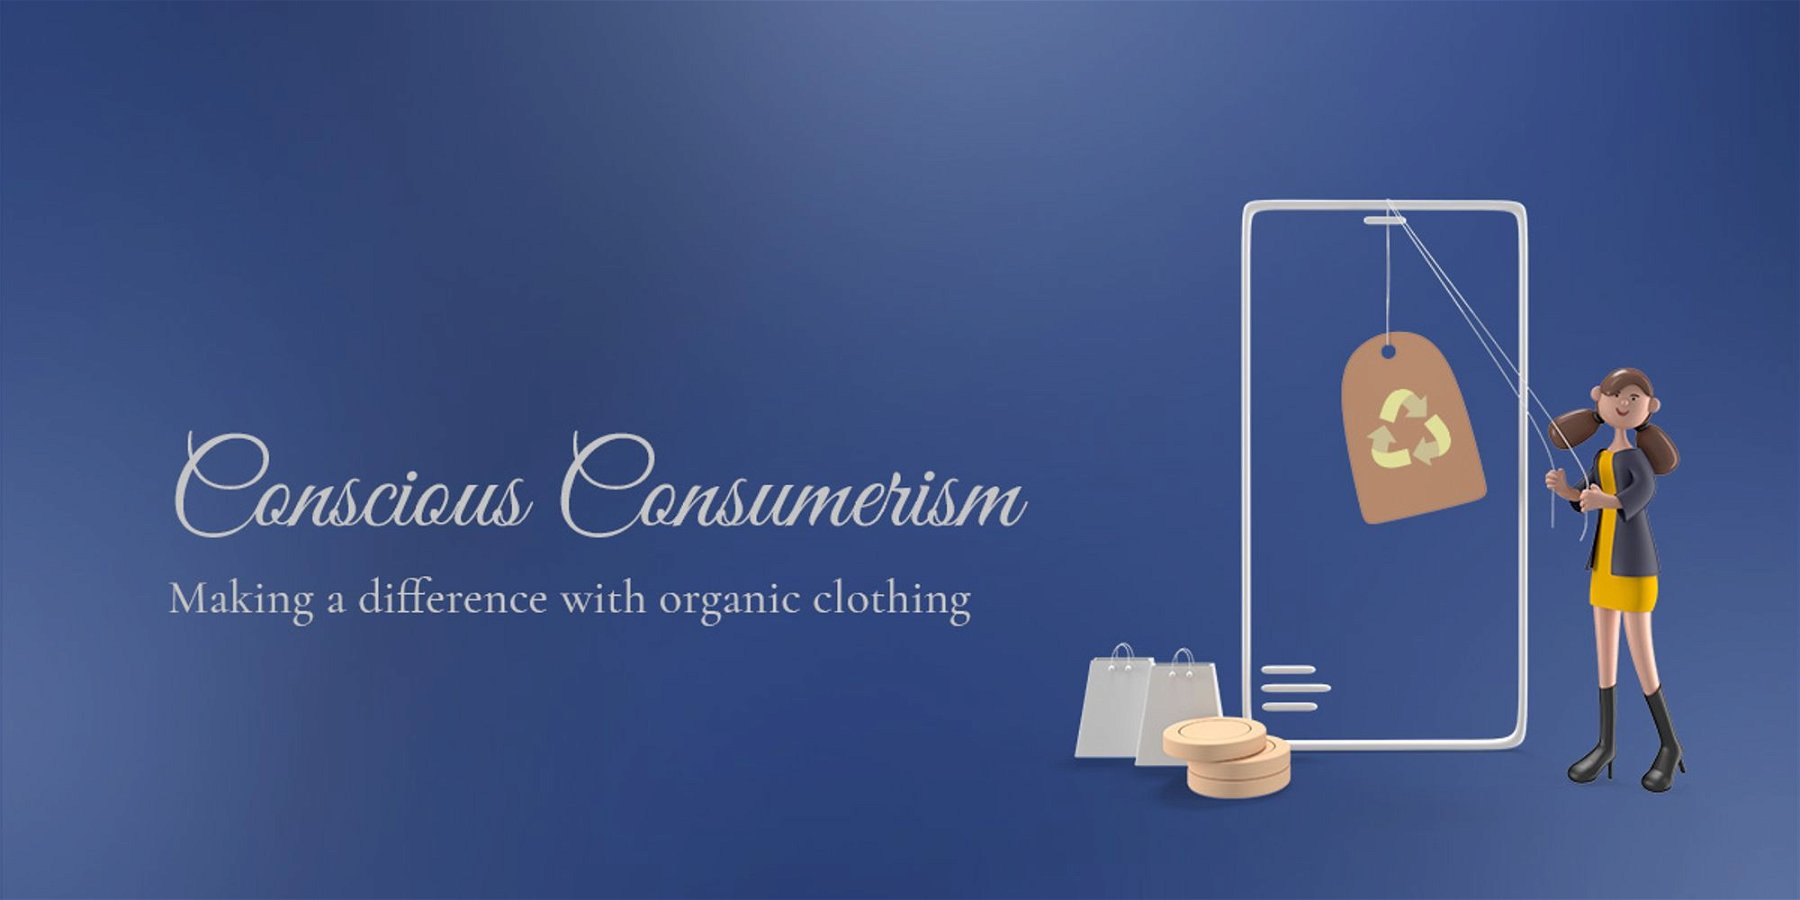 Conscious consumerism: making a difference with organic clothing